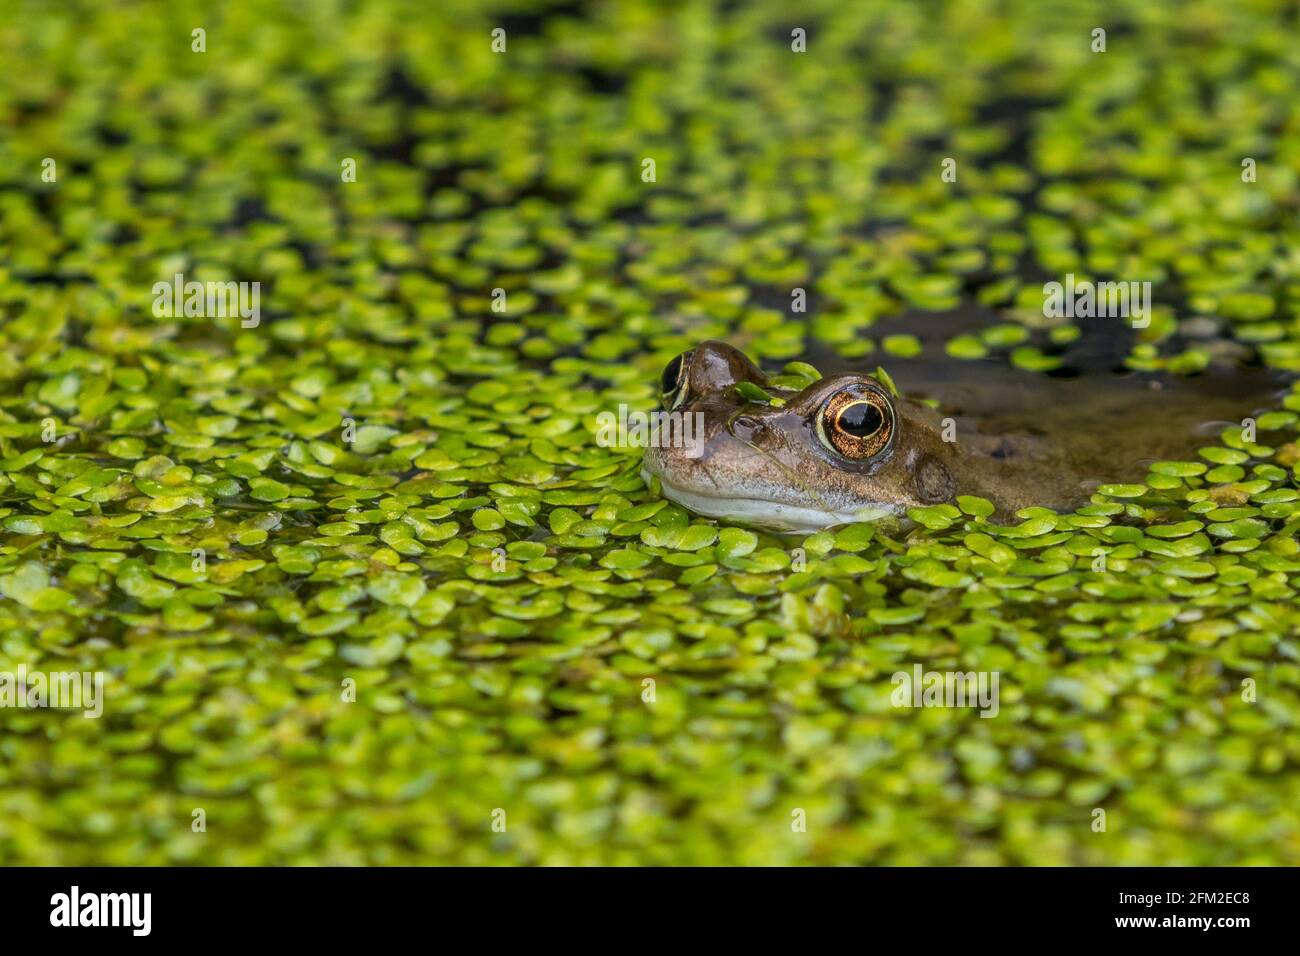 Frog close up in a pond Stock Photo